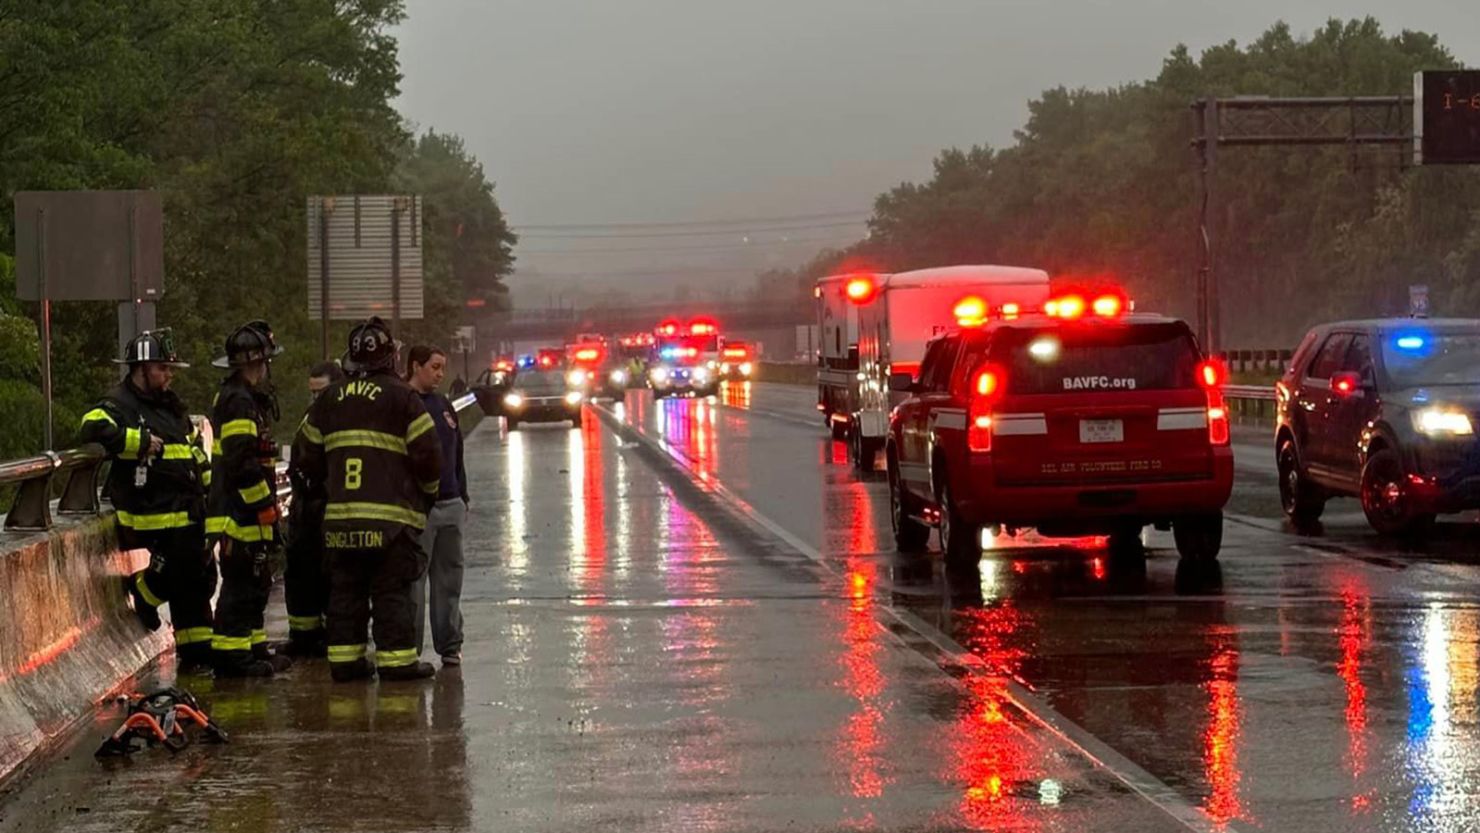 First responders at the scene of the crash in Harford County on May 5.